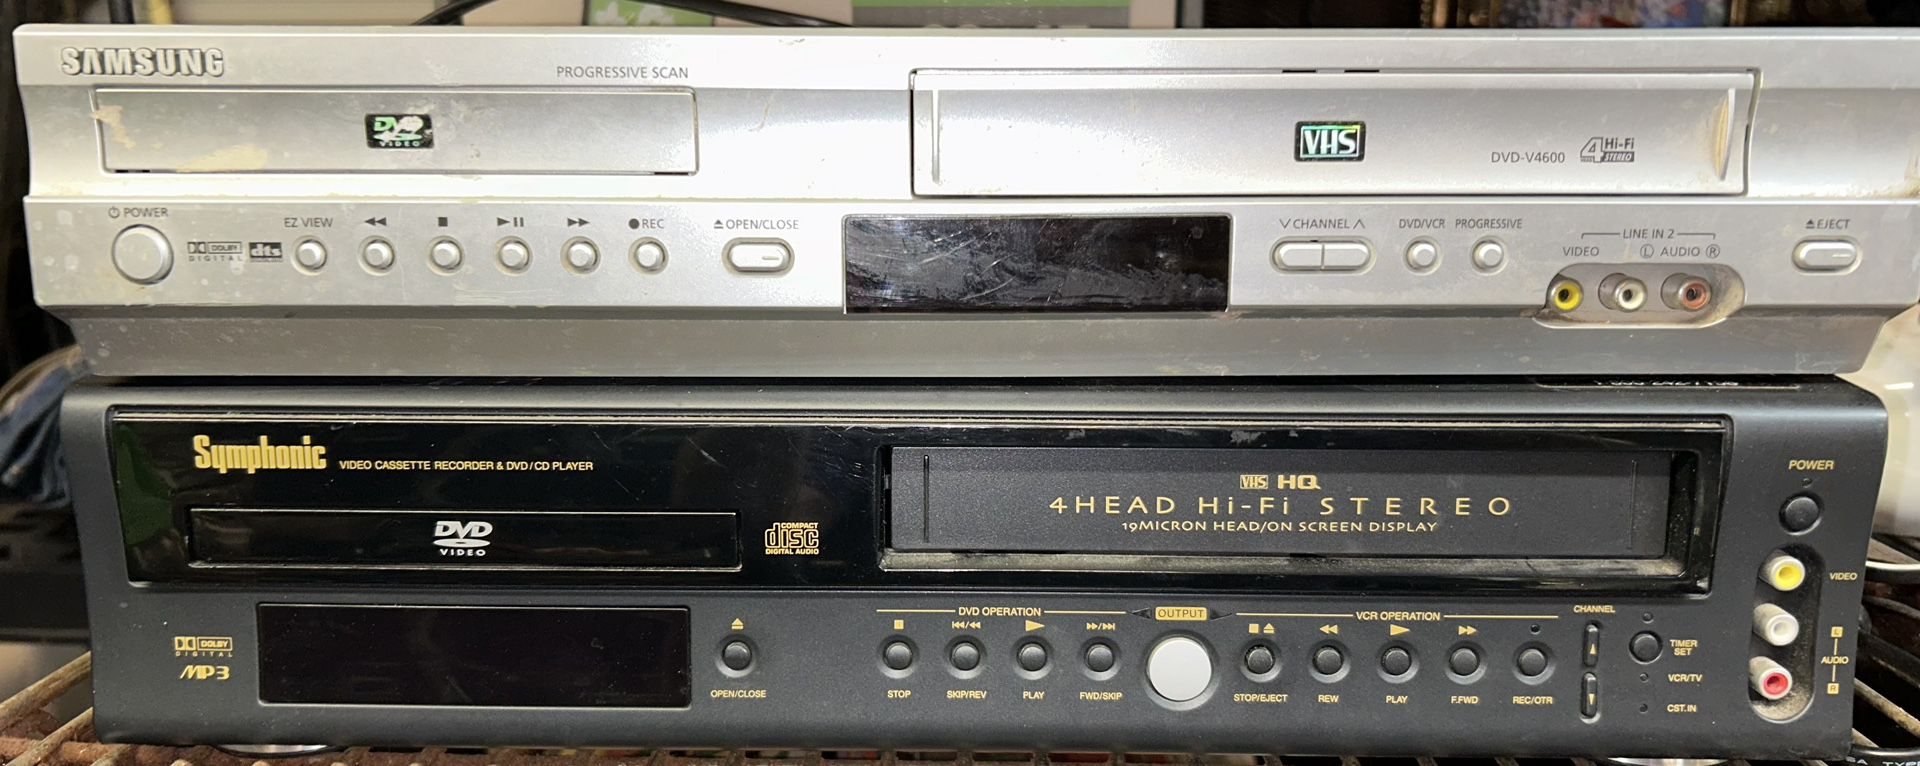 DVD/vhs Combo Players 